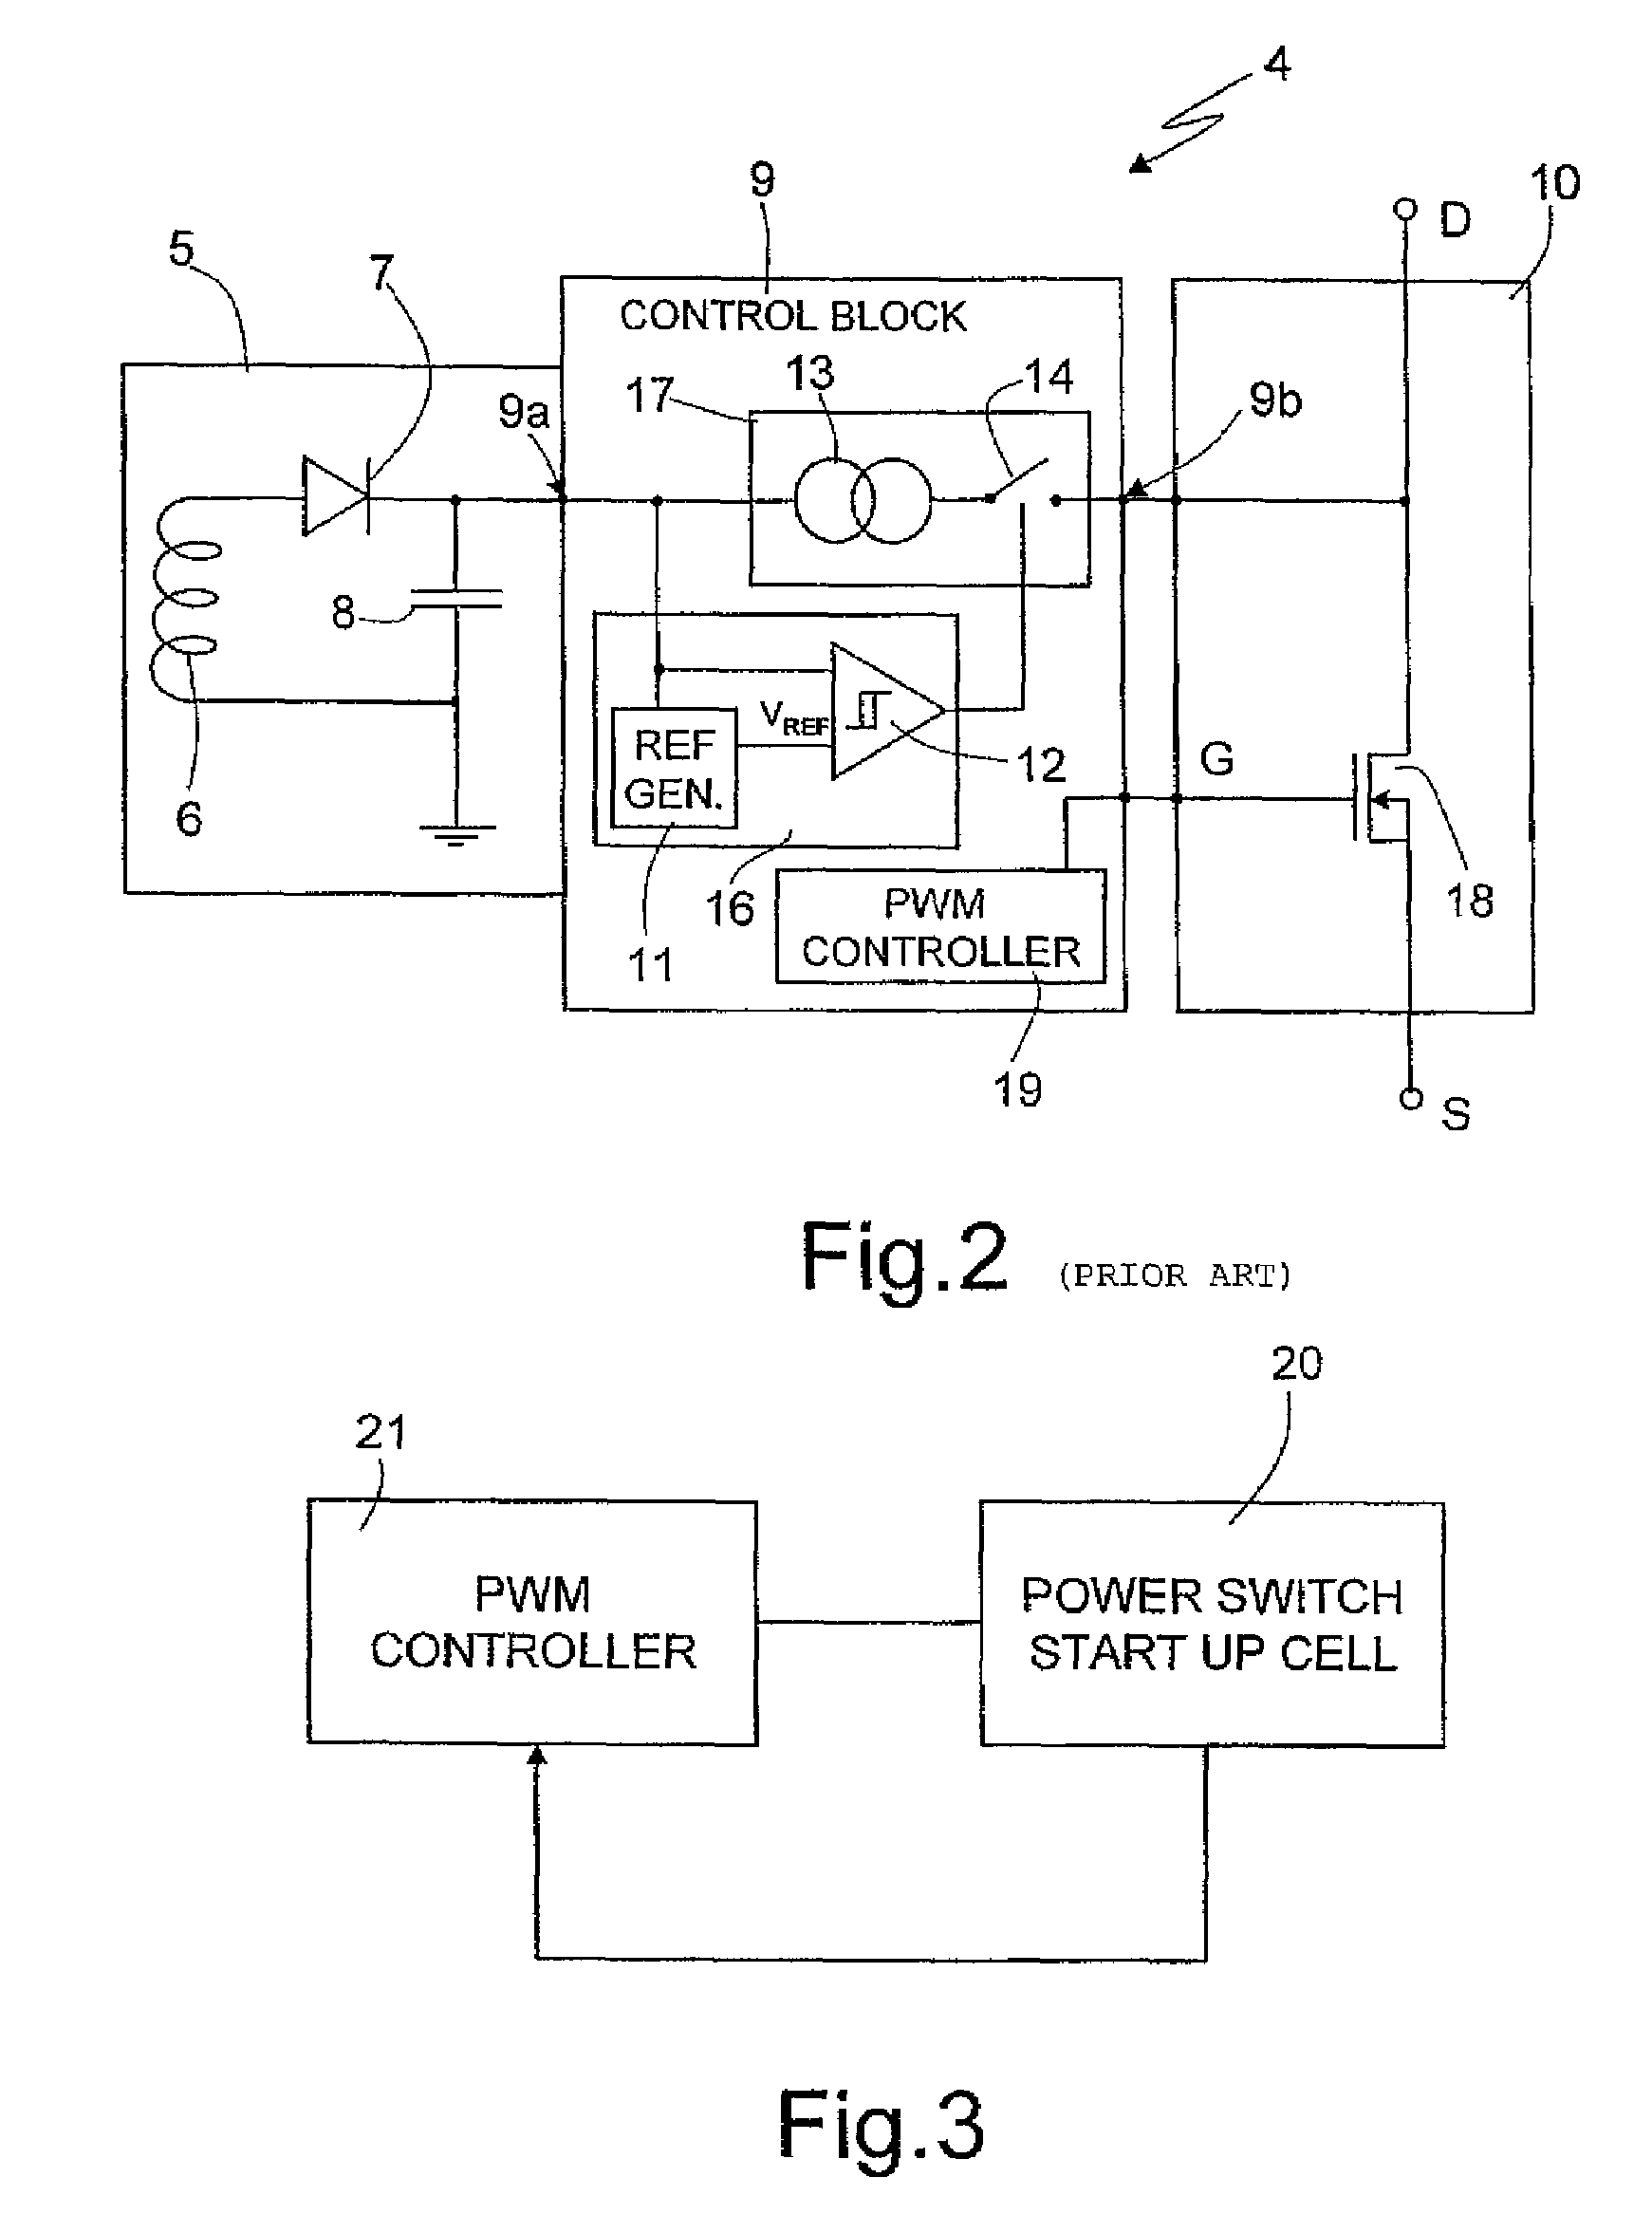 Integrated power device having a start-up structure